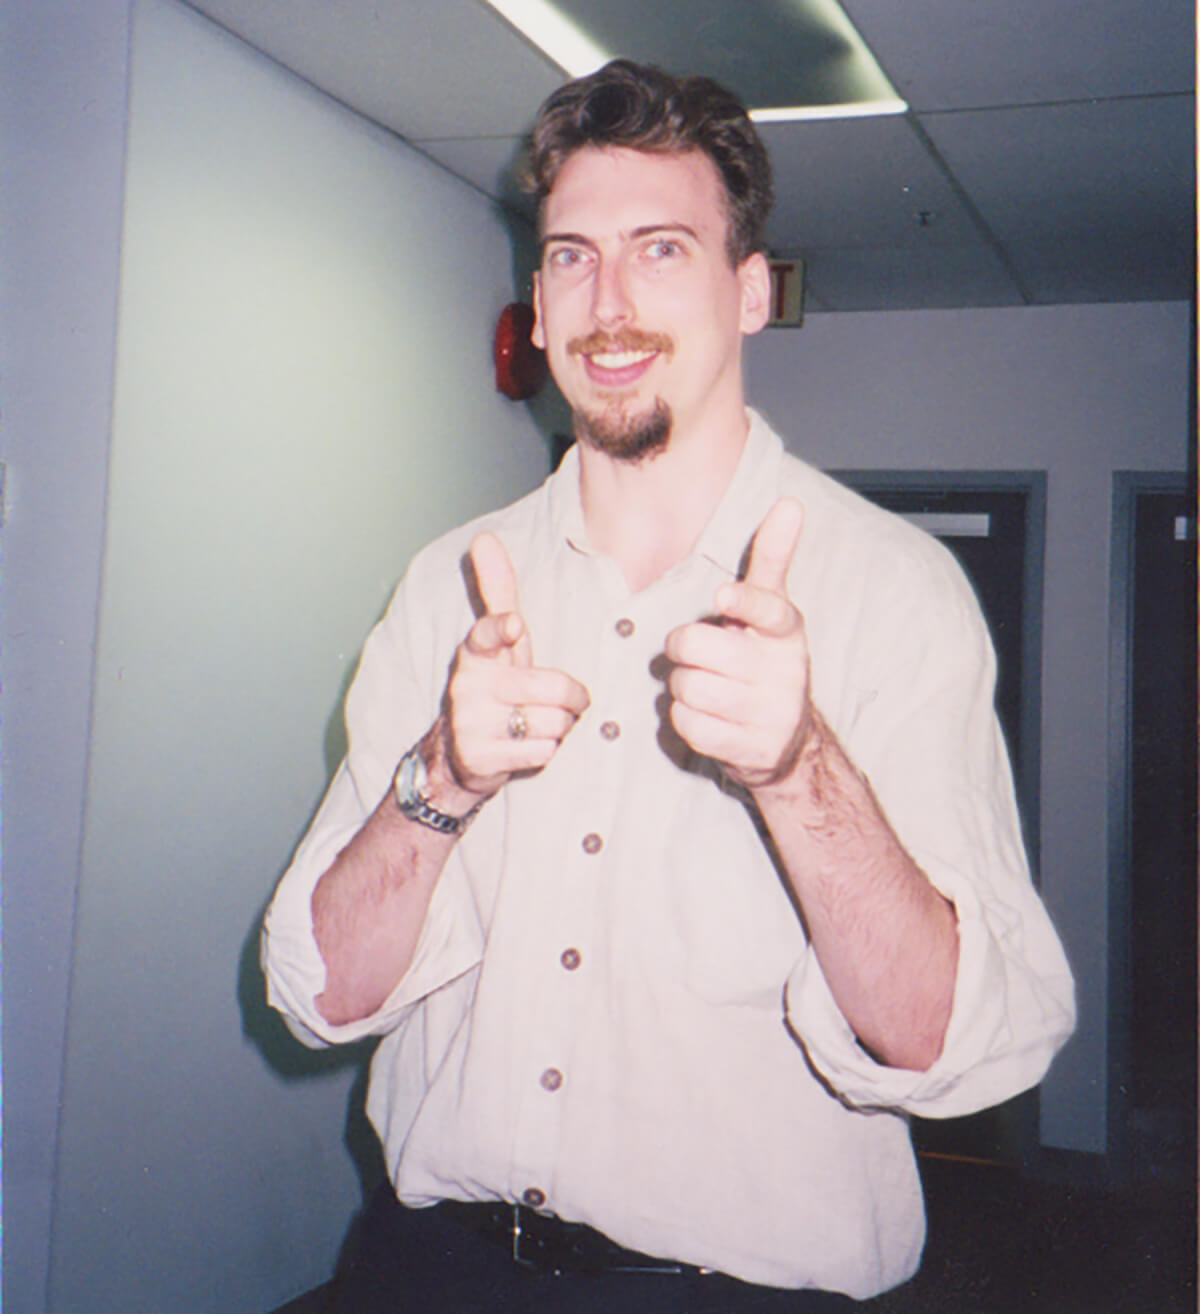 A young Duncan Shields smiles and makes finger guns for the camera in this picture from his days as a DigiPen student.